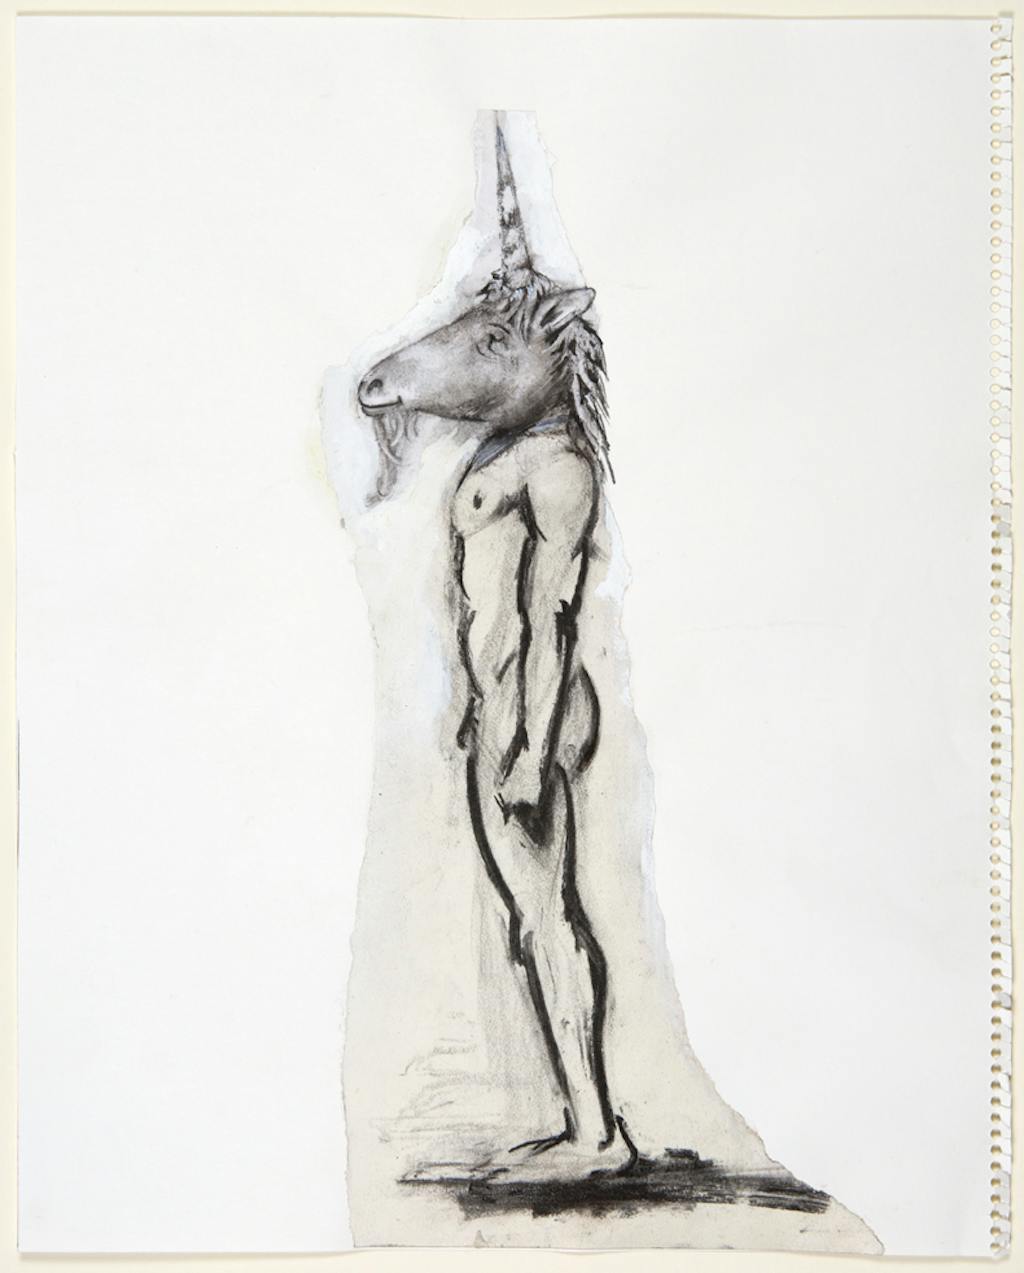 Martial Raysse
Le Prince Djem, 1989
Charcoal, acrylic and collages on paper
45,8 x 36,8 cm - © Mennour